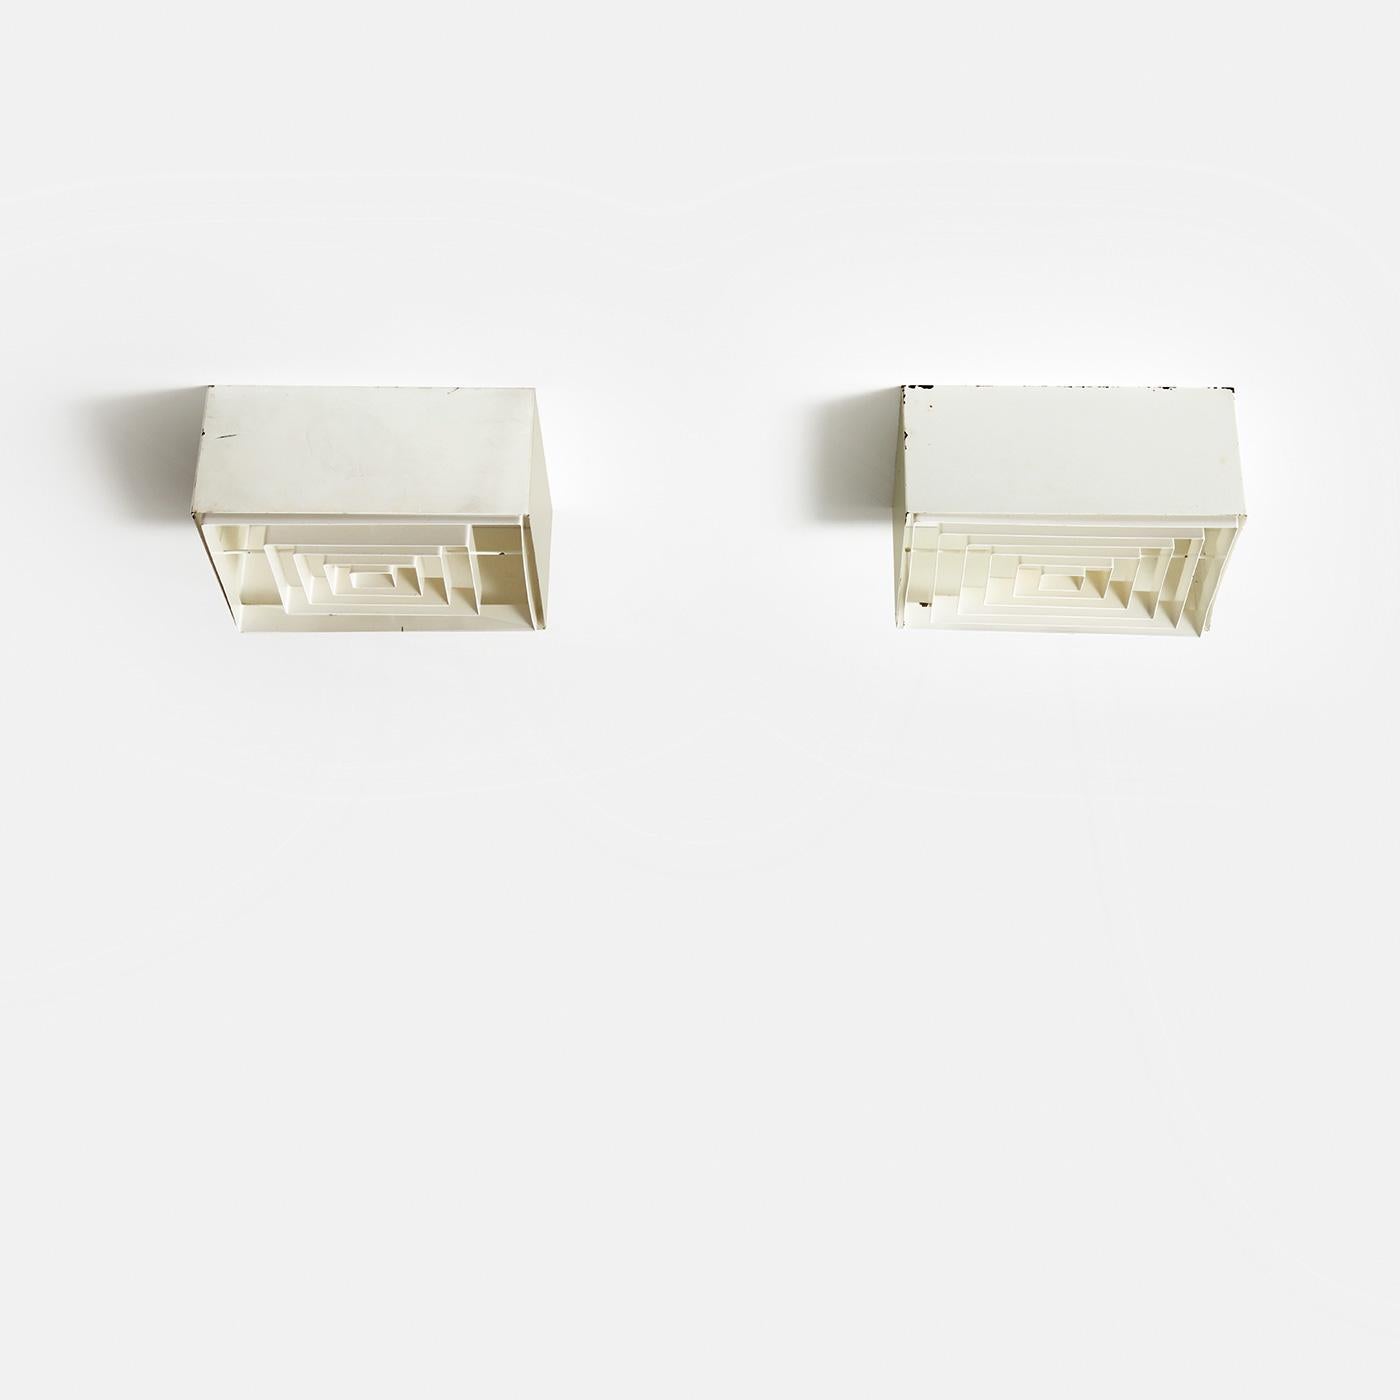 Pair of rare metal ceiling lamps, model H2-55/30, manufactured by Idman in Finland, 1964.

These rare and unique sculptural ceiling lamps were manufactured by the company Idman in Finland in 1964, the same exact company that manufactured various